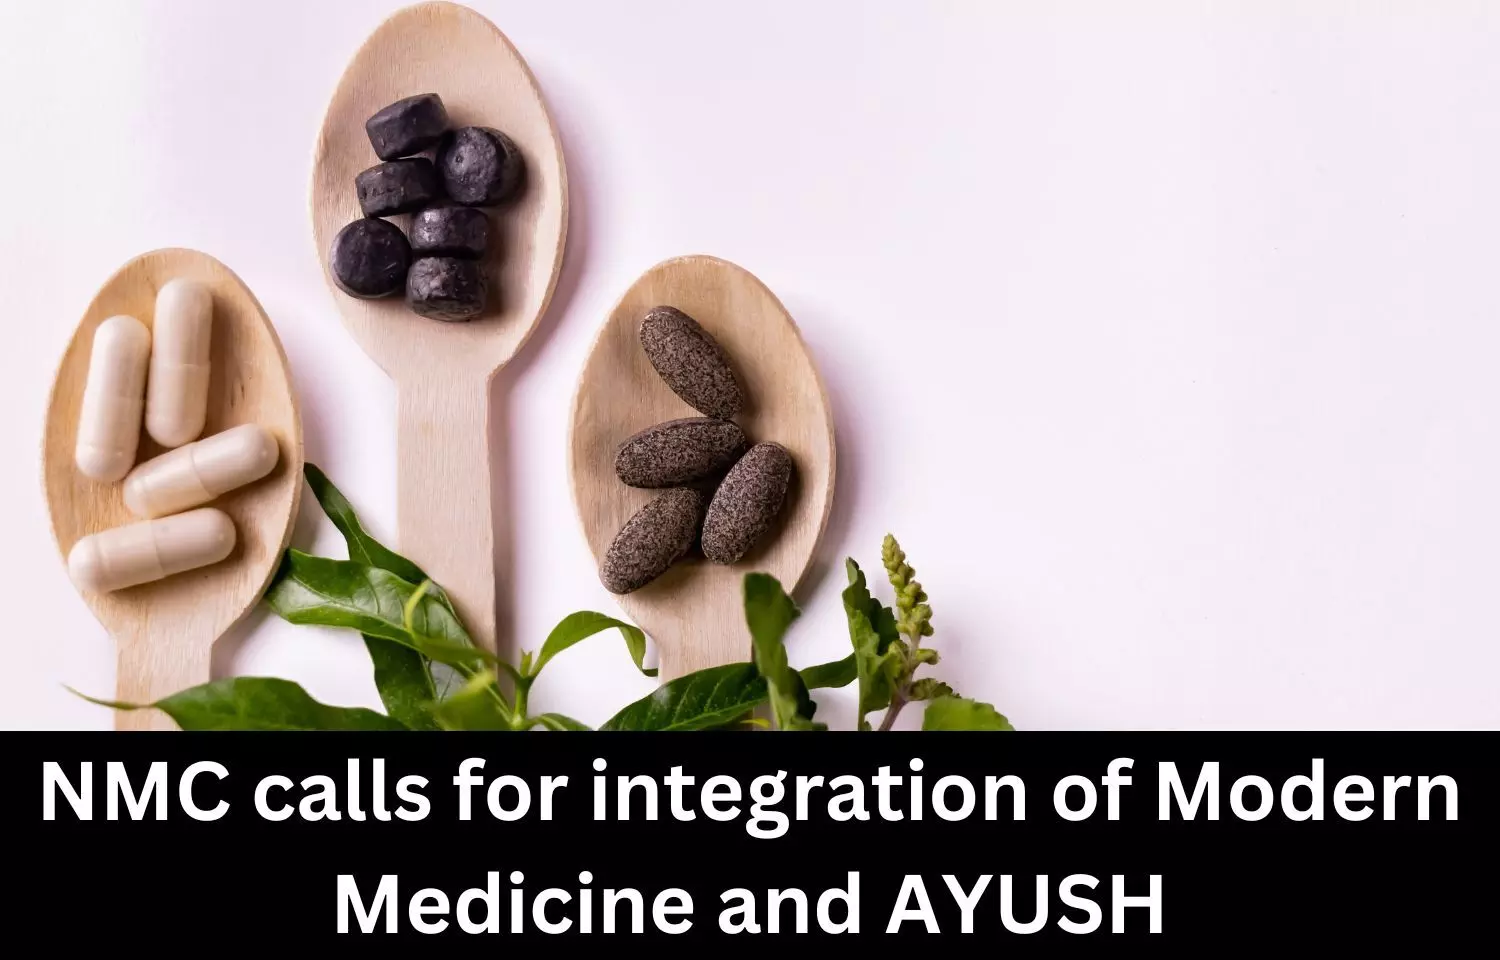 Every medical college must have department of integrative medicine research, NMC calls for integration of modern medicine and AYUSH